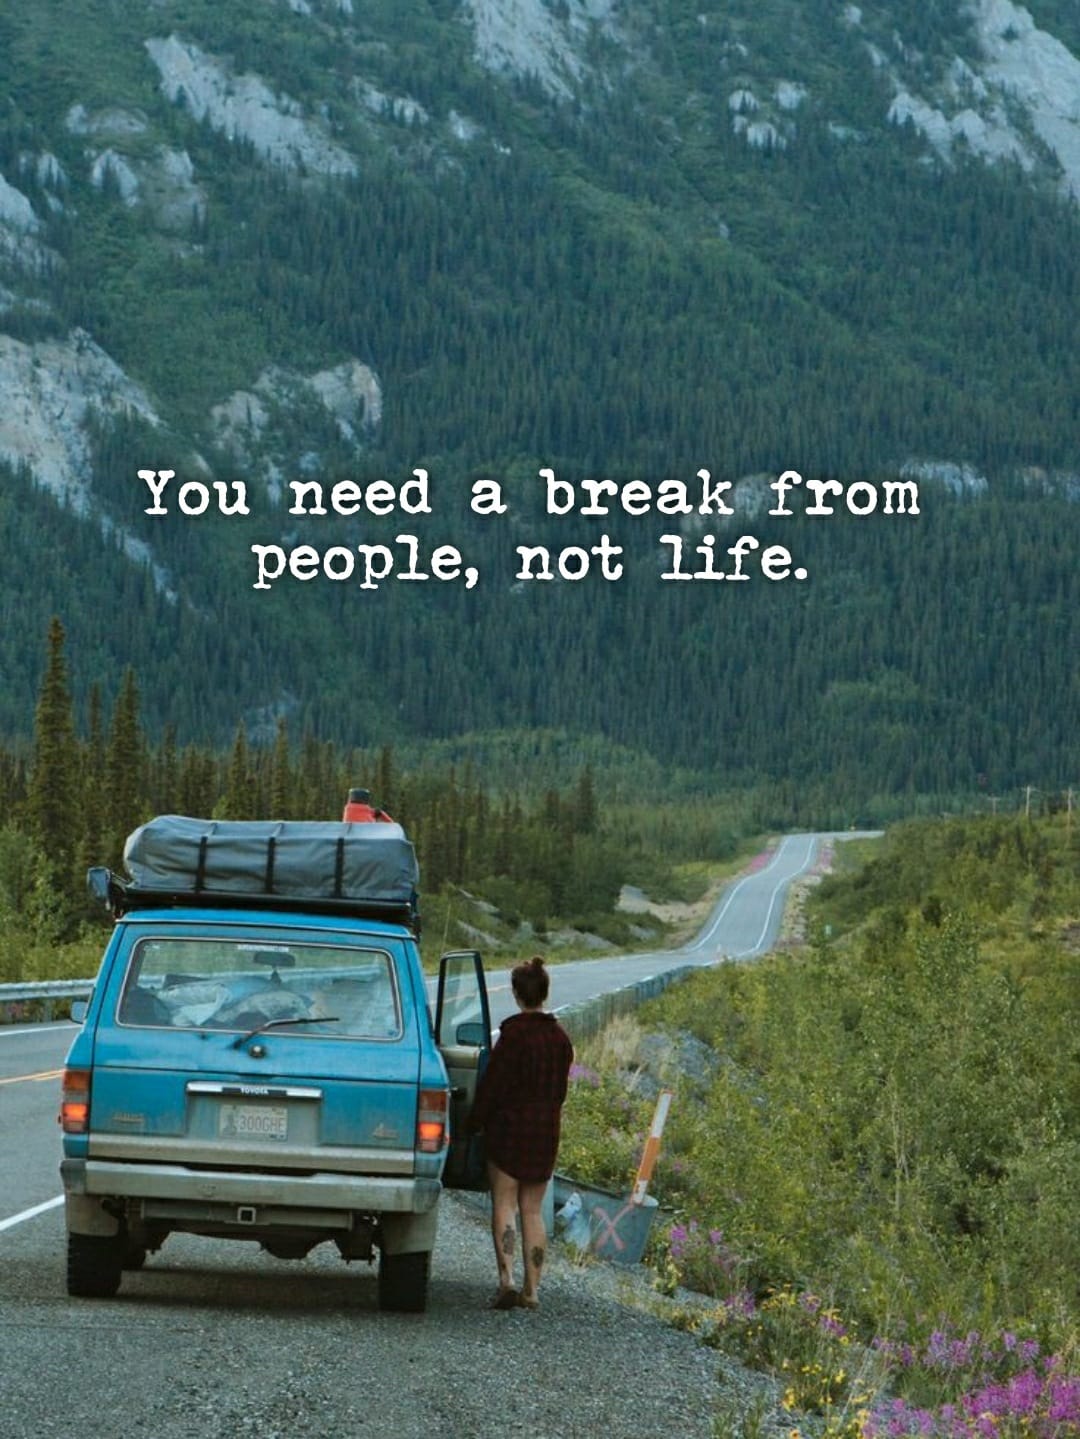 You need a break from people, not life